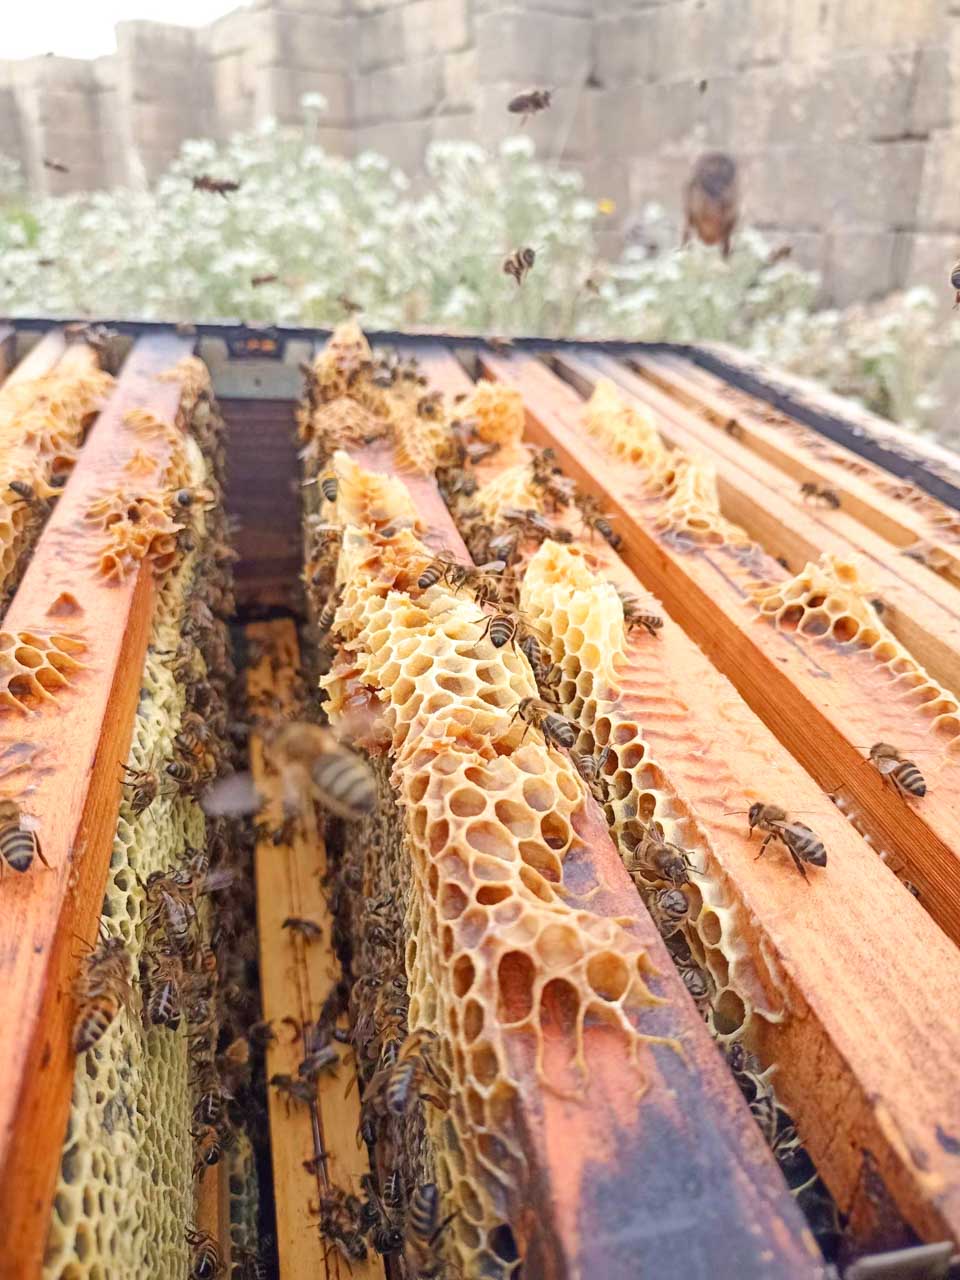 A close-up shot of a hive frame with honeycomb